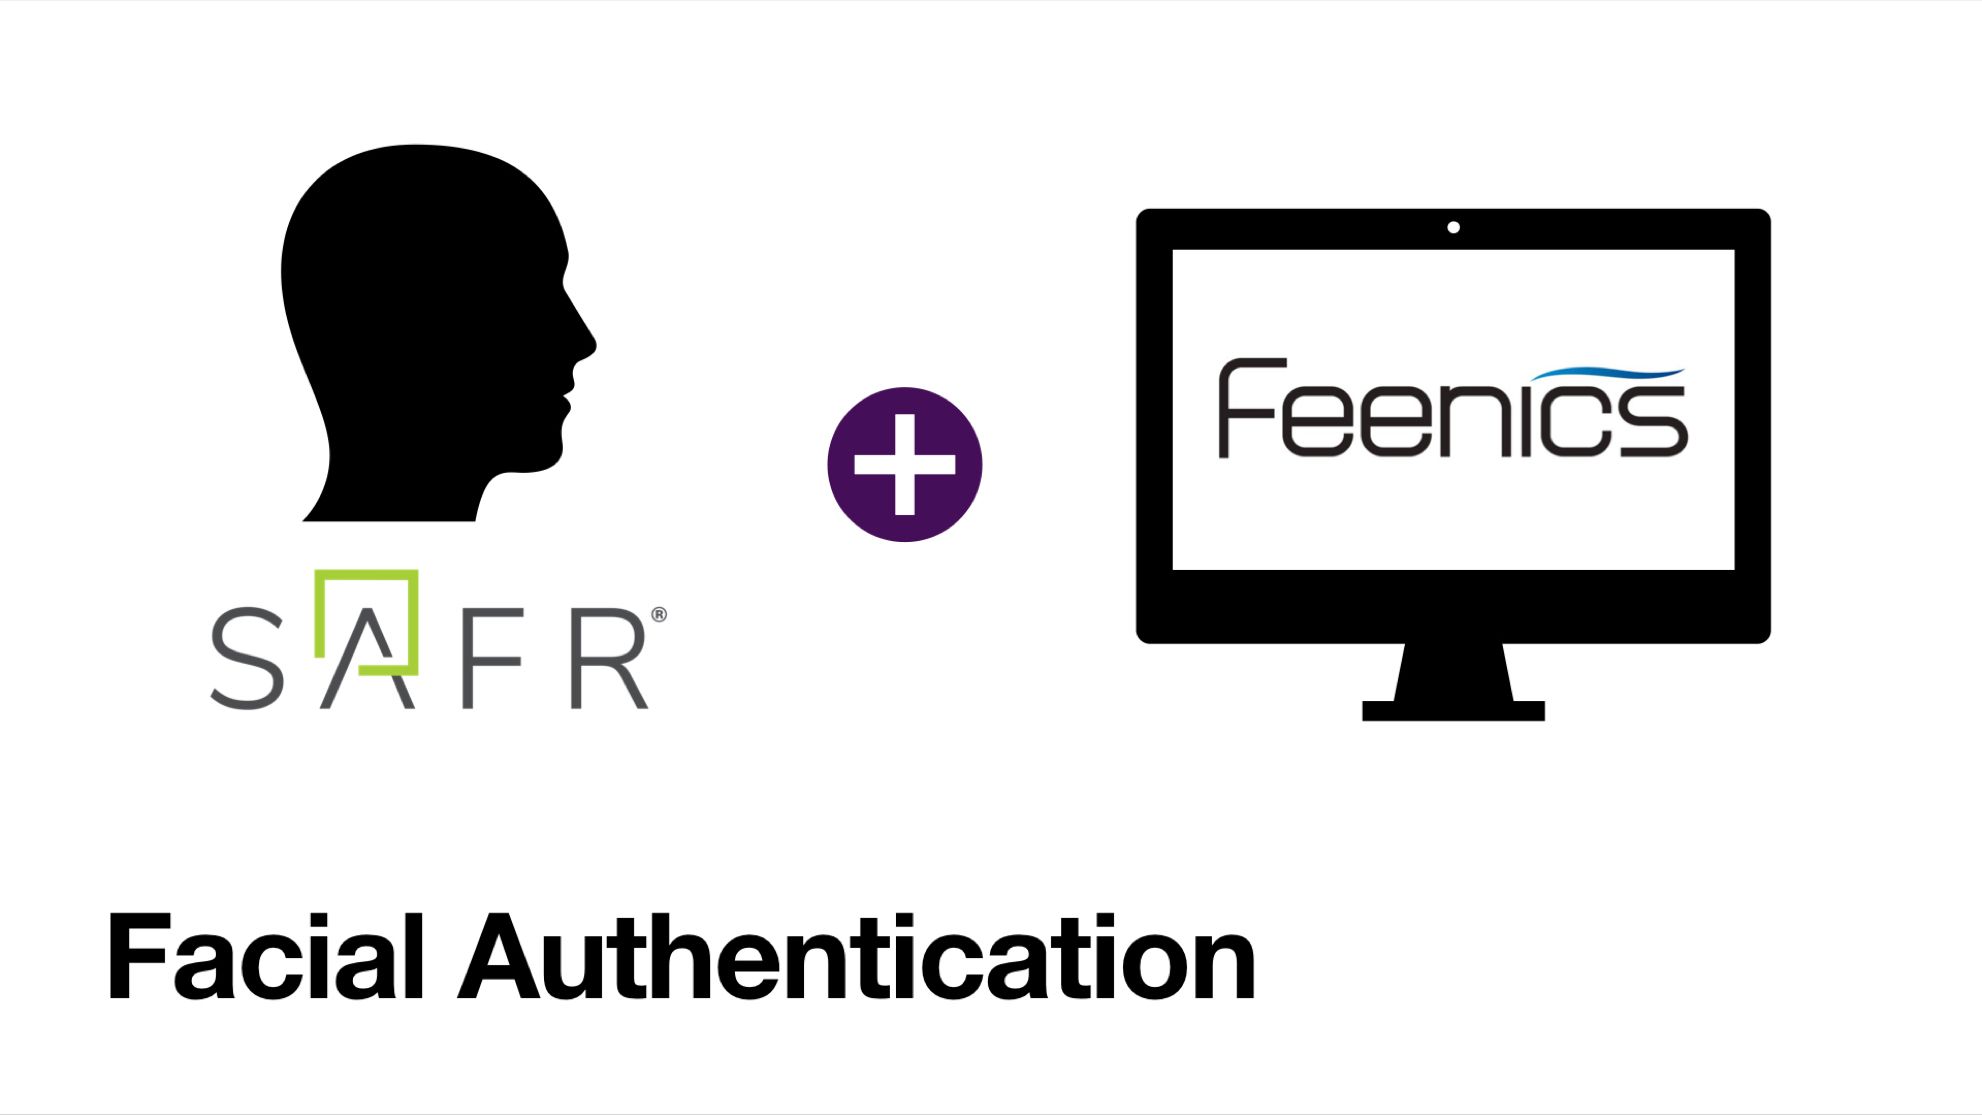 Feenics / SAFR Integration Provides Game Changing Facial Authentication Experience